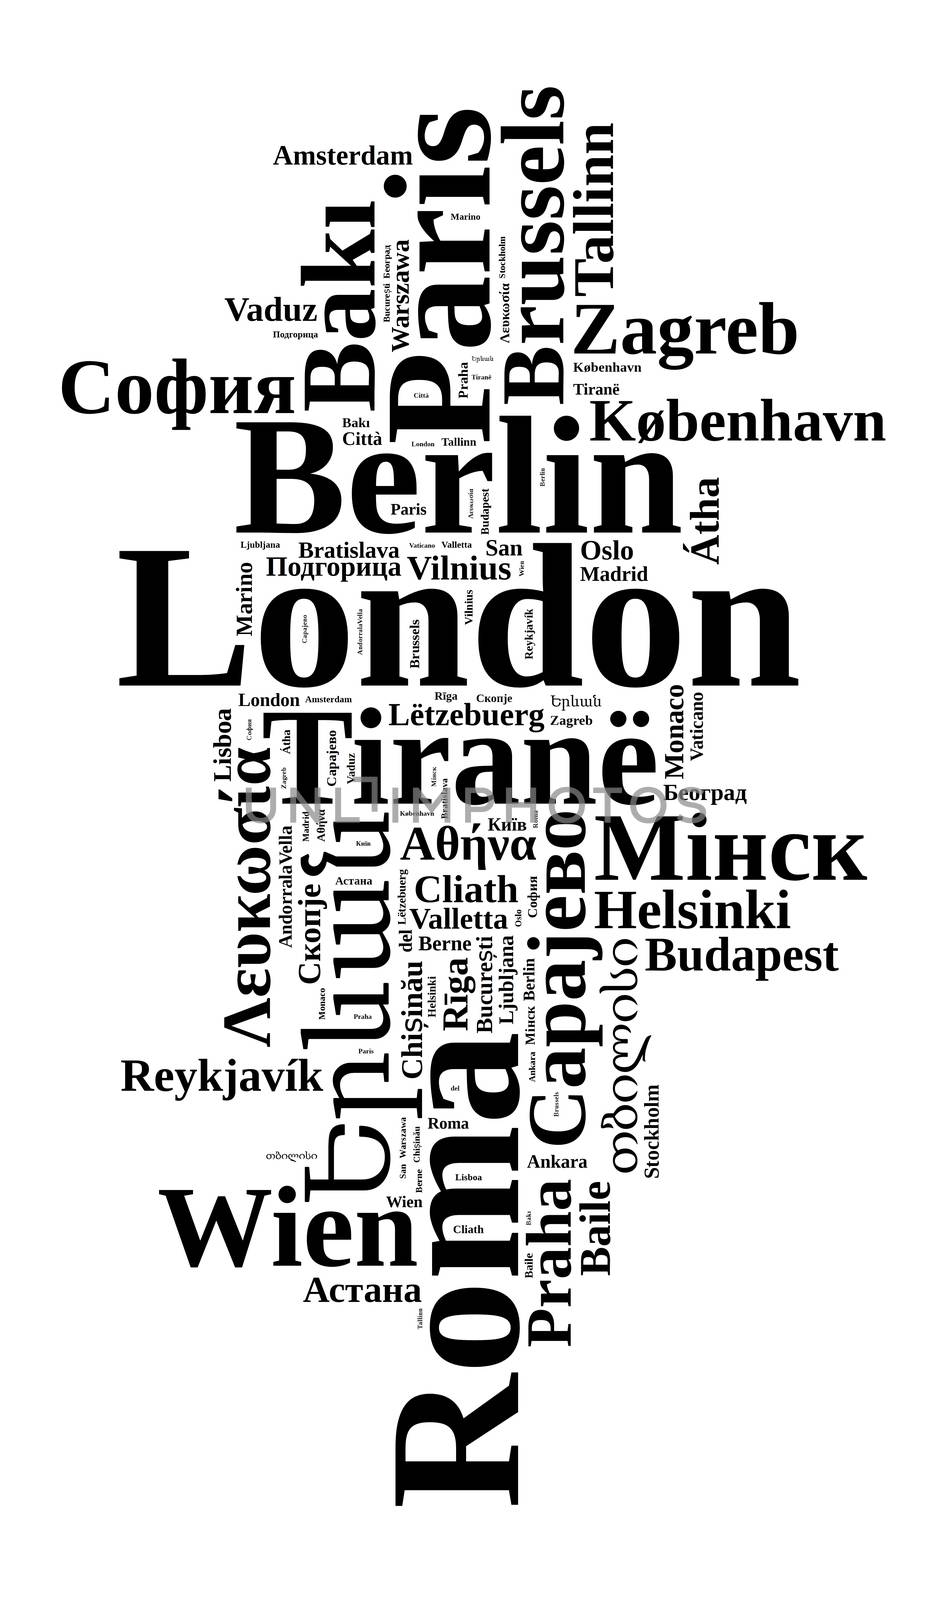 Capitals in europe in europe word cloud concept